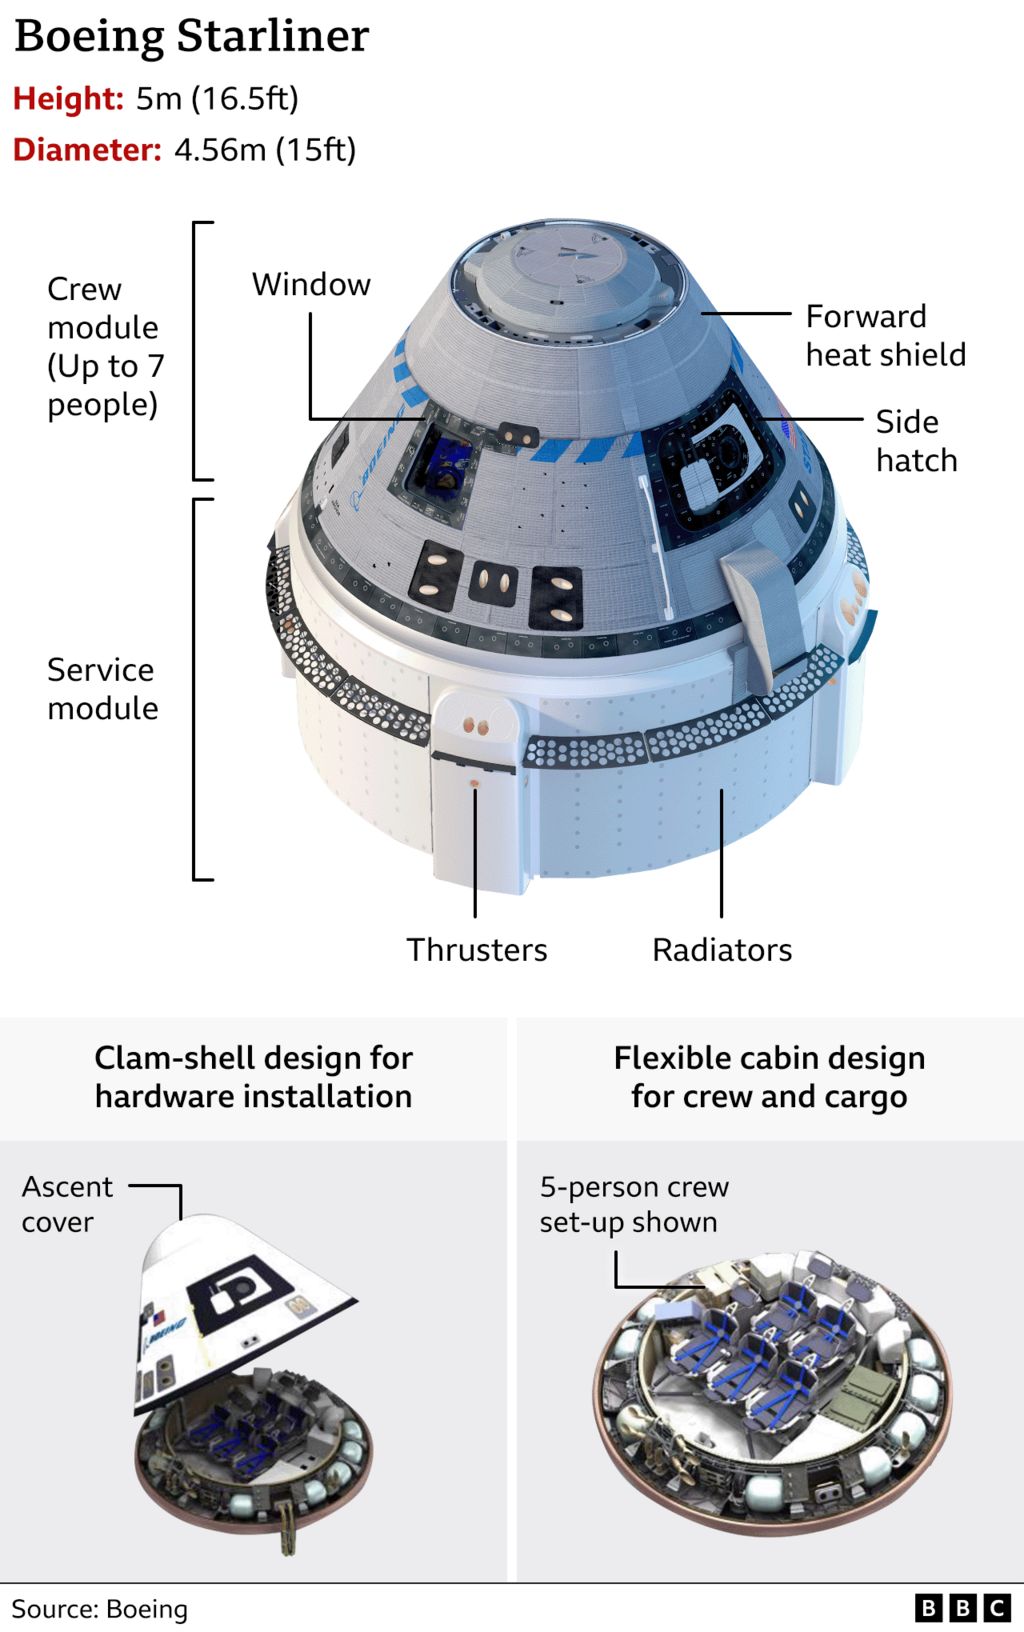 Graphic showing details of Starliner capsule